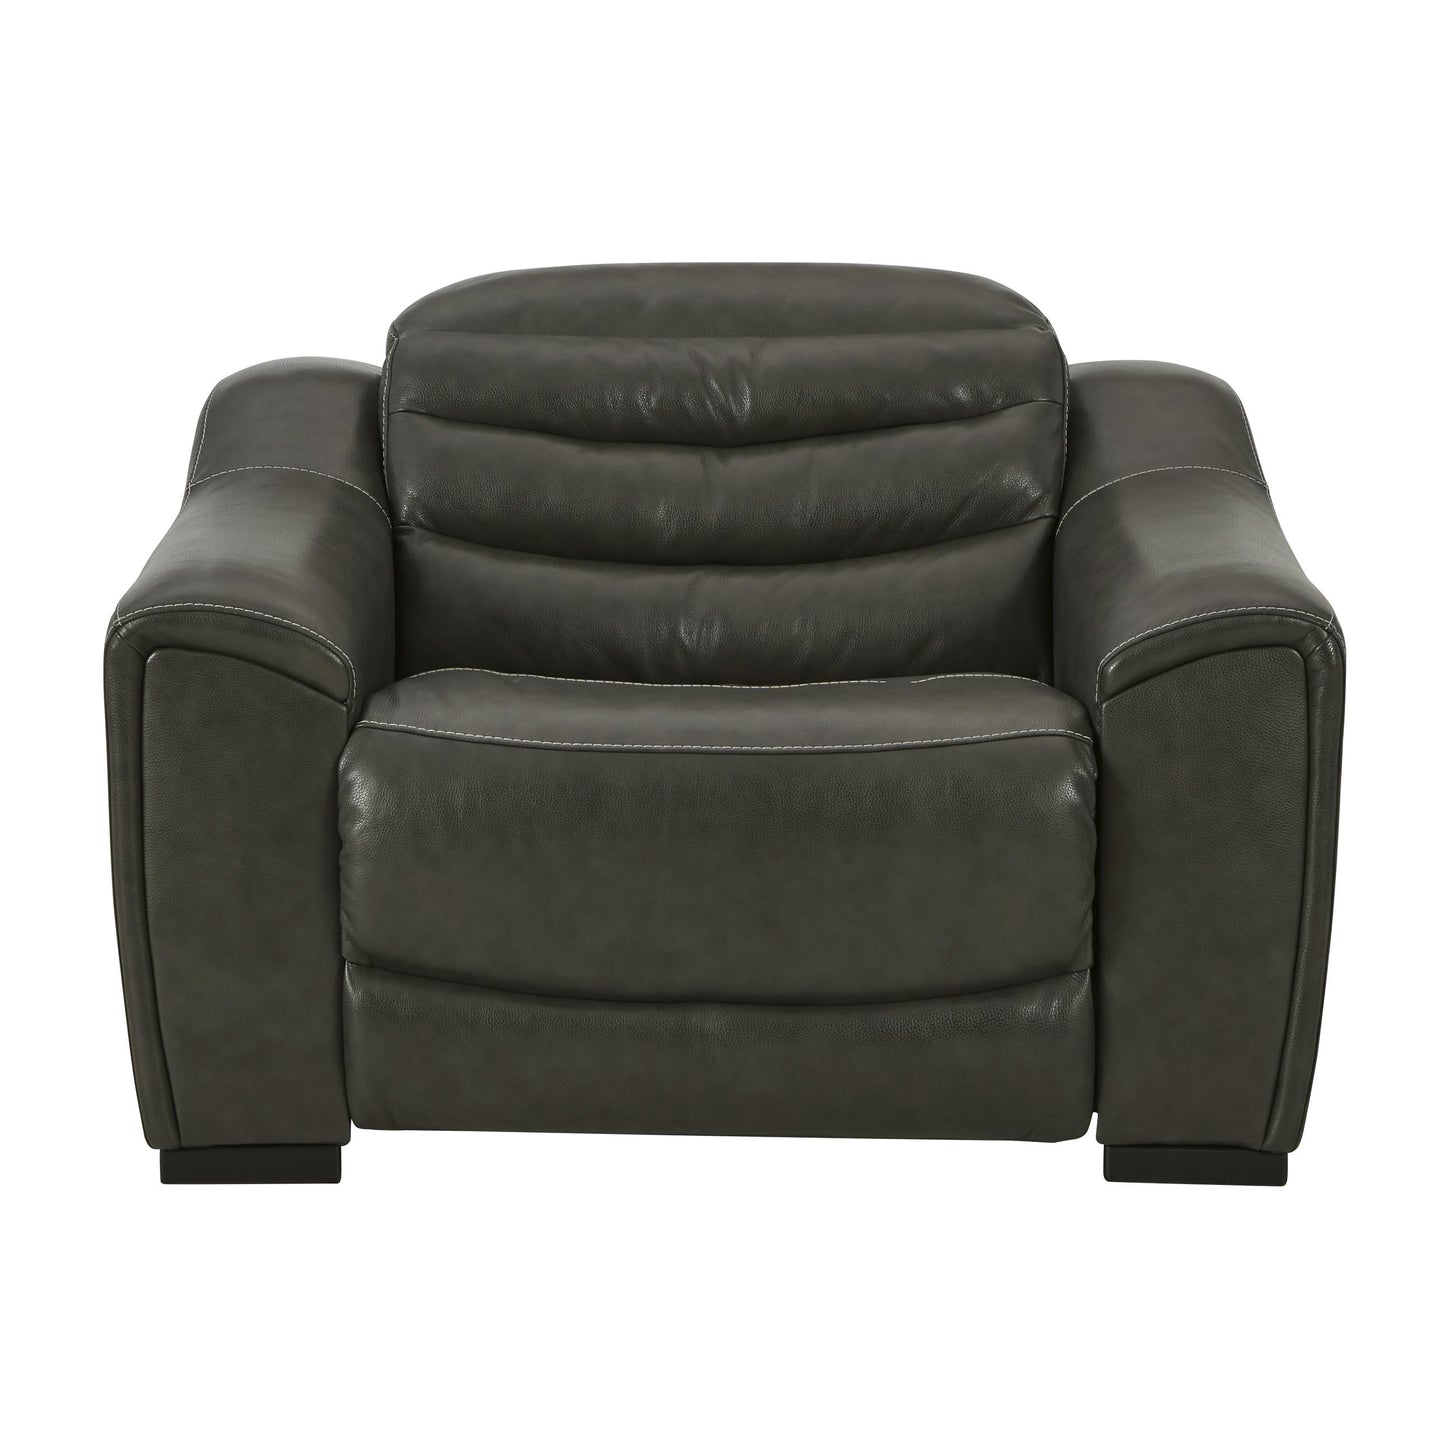 Signature Design by Ashley Center Line Power Leather Match Recliner U6340413 IMAGE 2